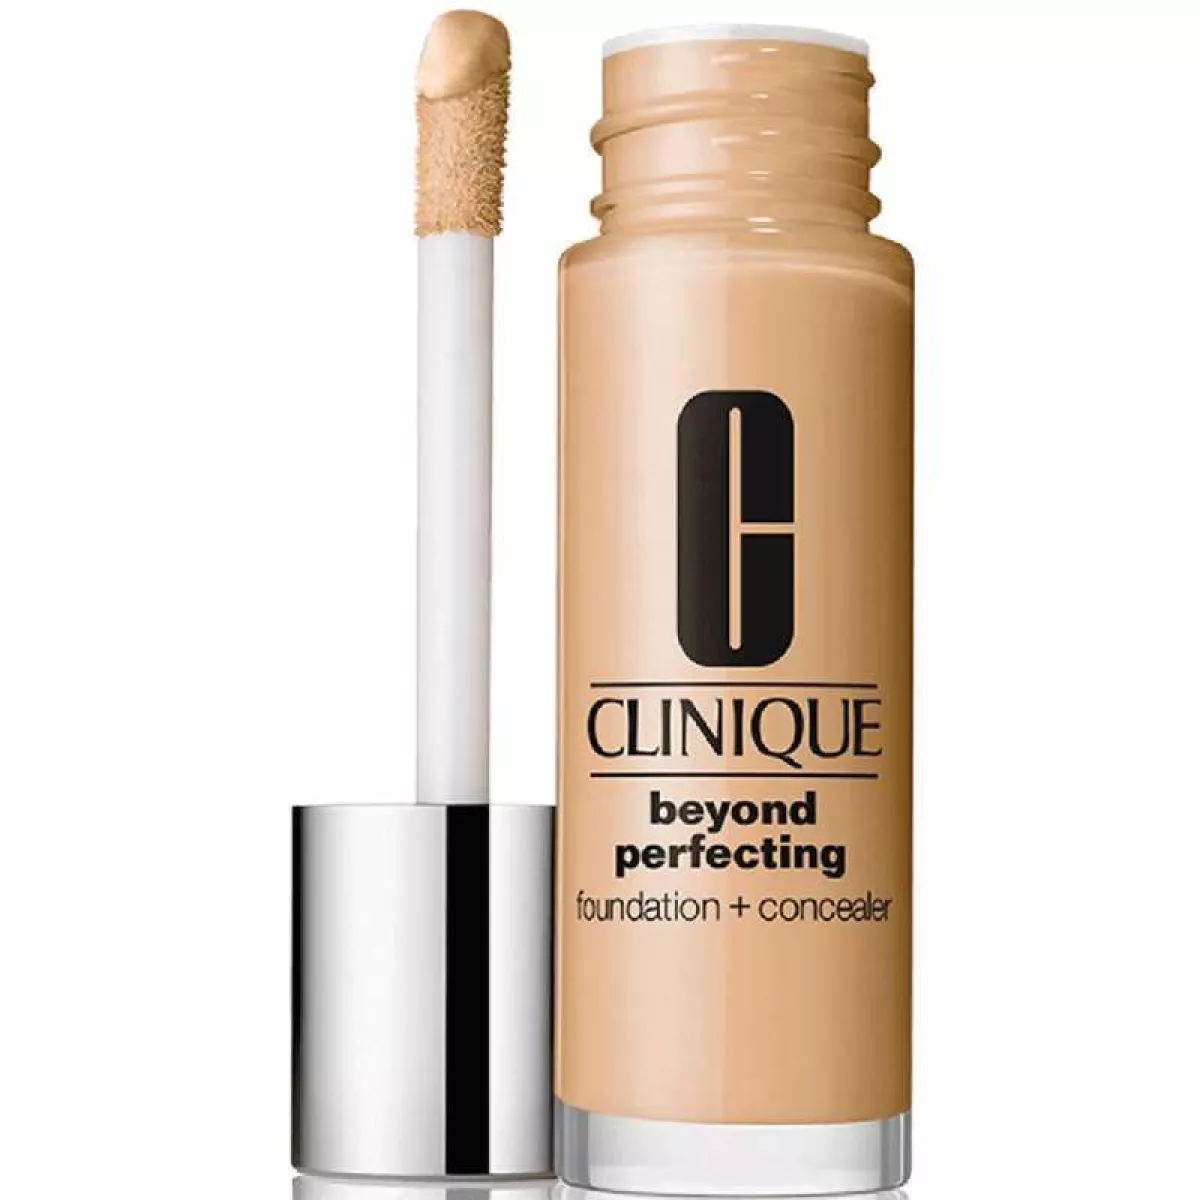 #3 - Clinique Beyond Perfecting Foundation + Concealer 30 ml - Linen